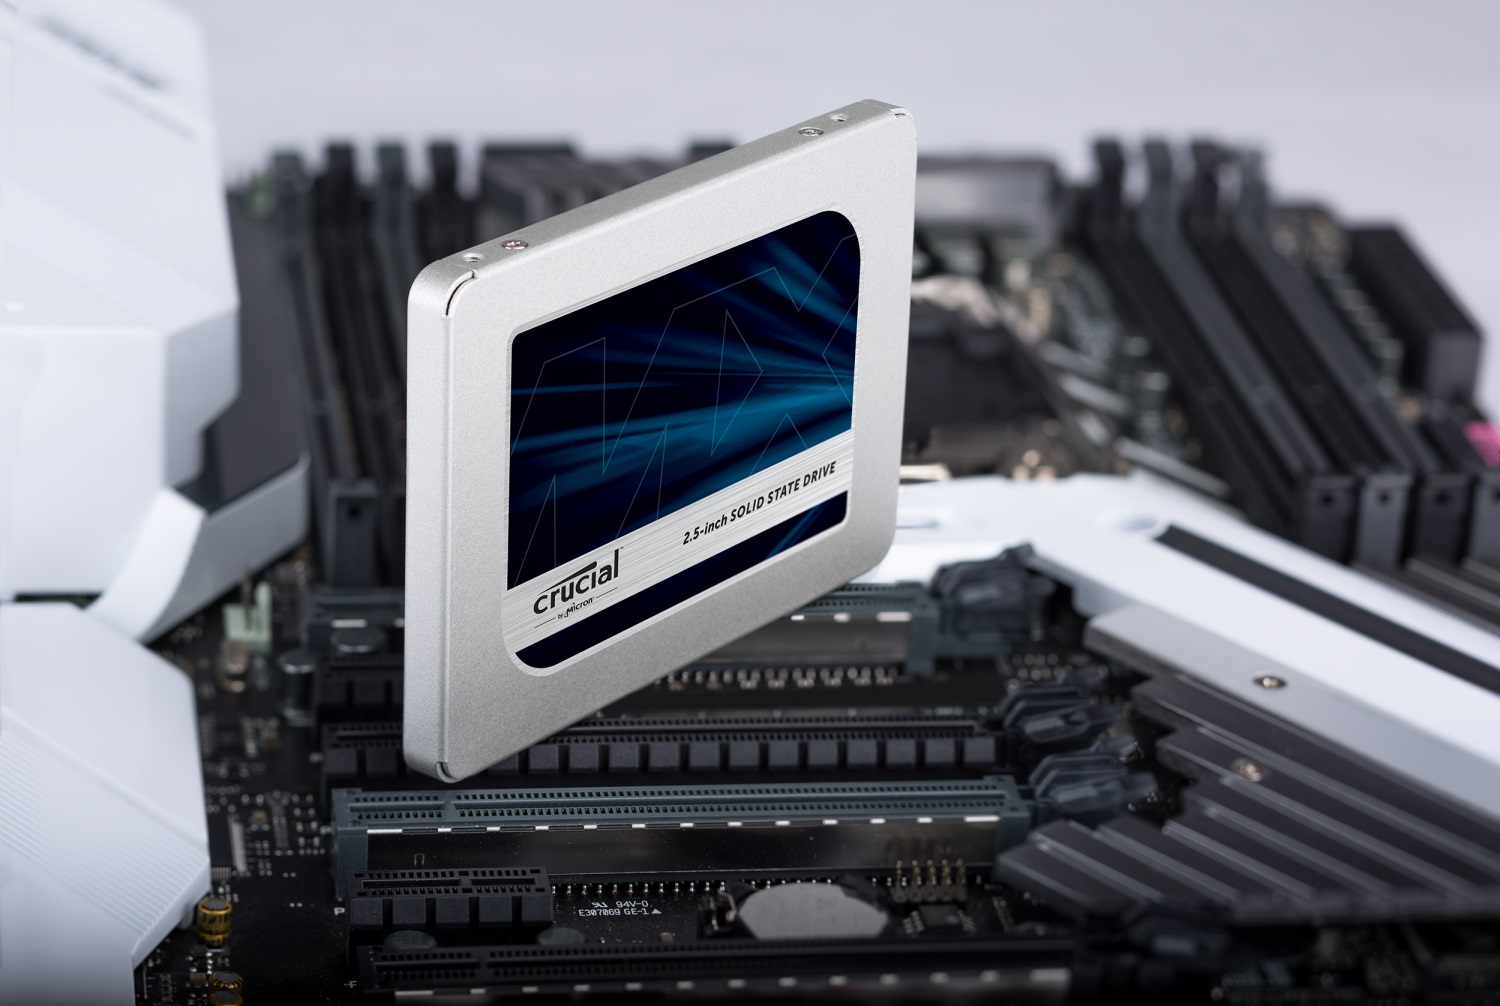 Crucial MX500 4TB review - SATA SSD with an extreme amount of